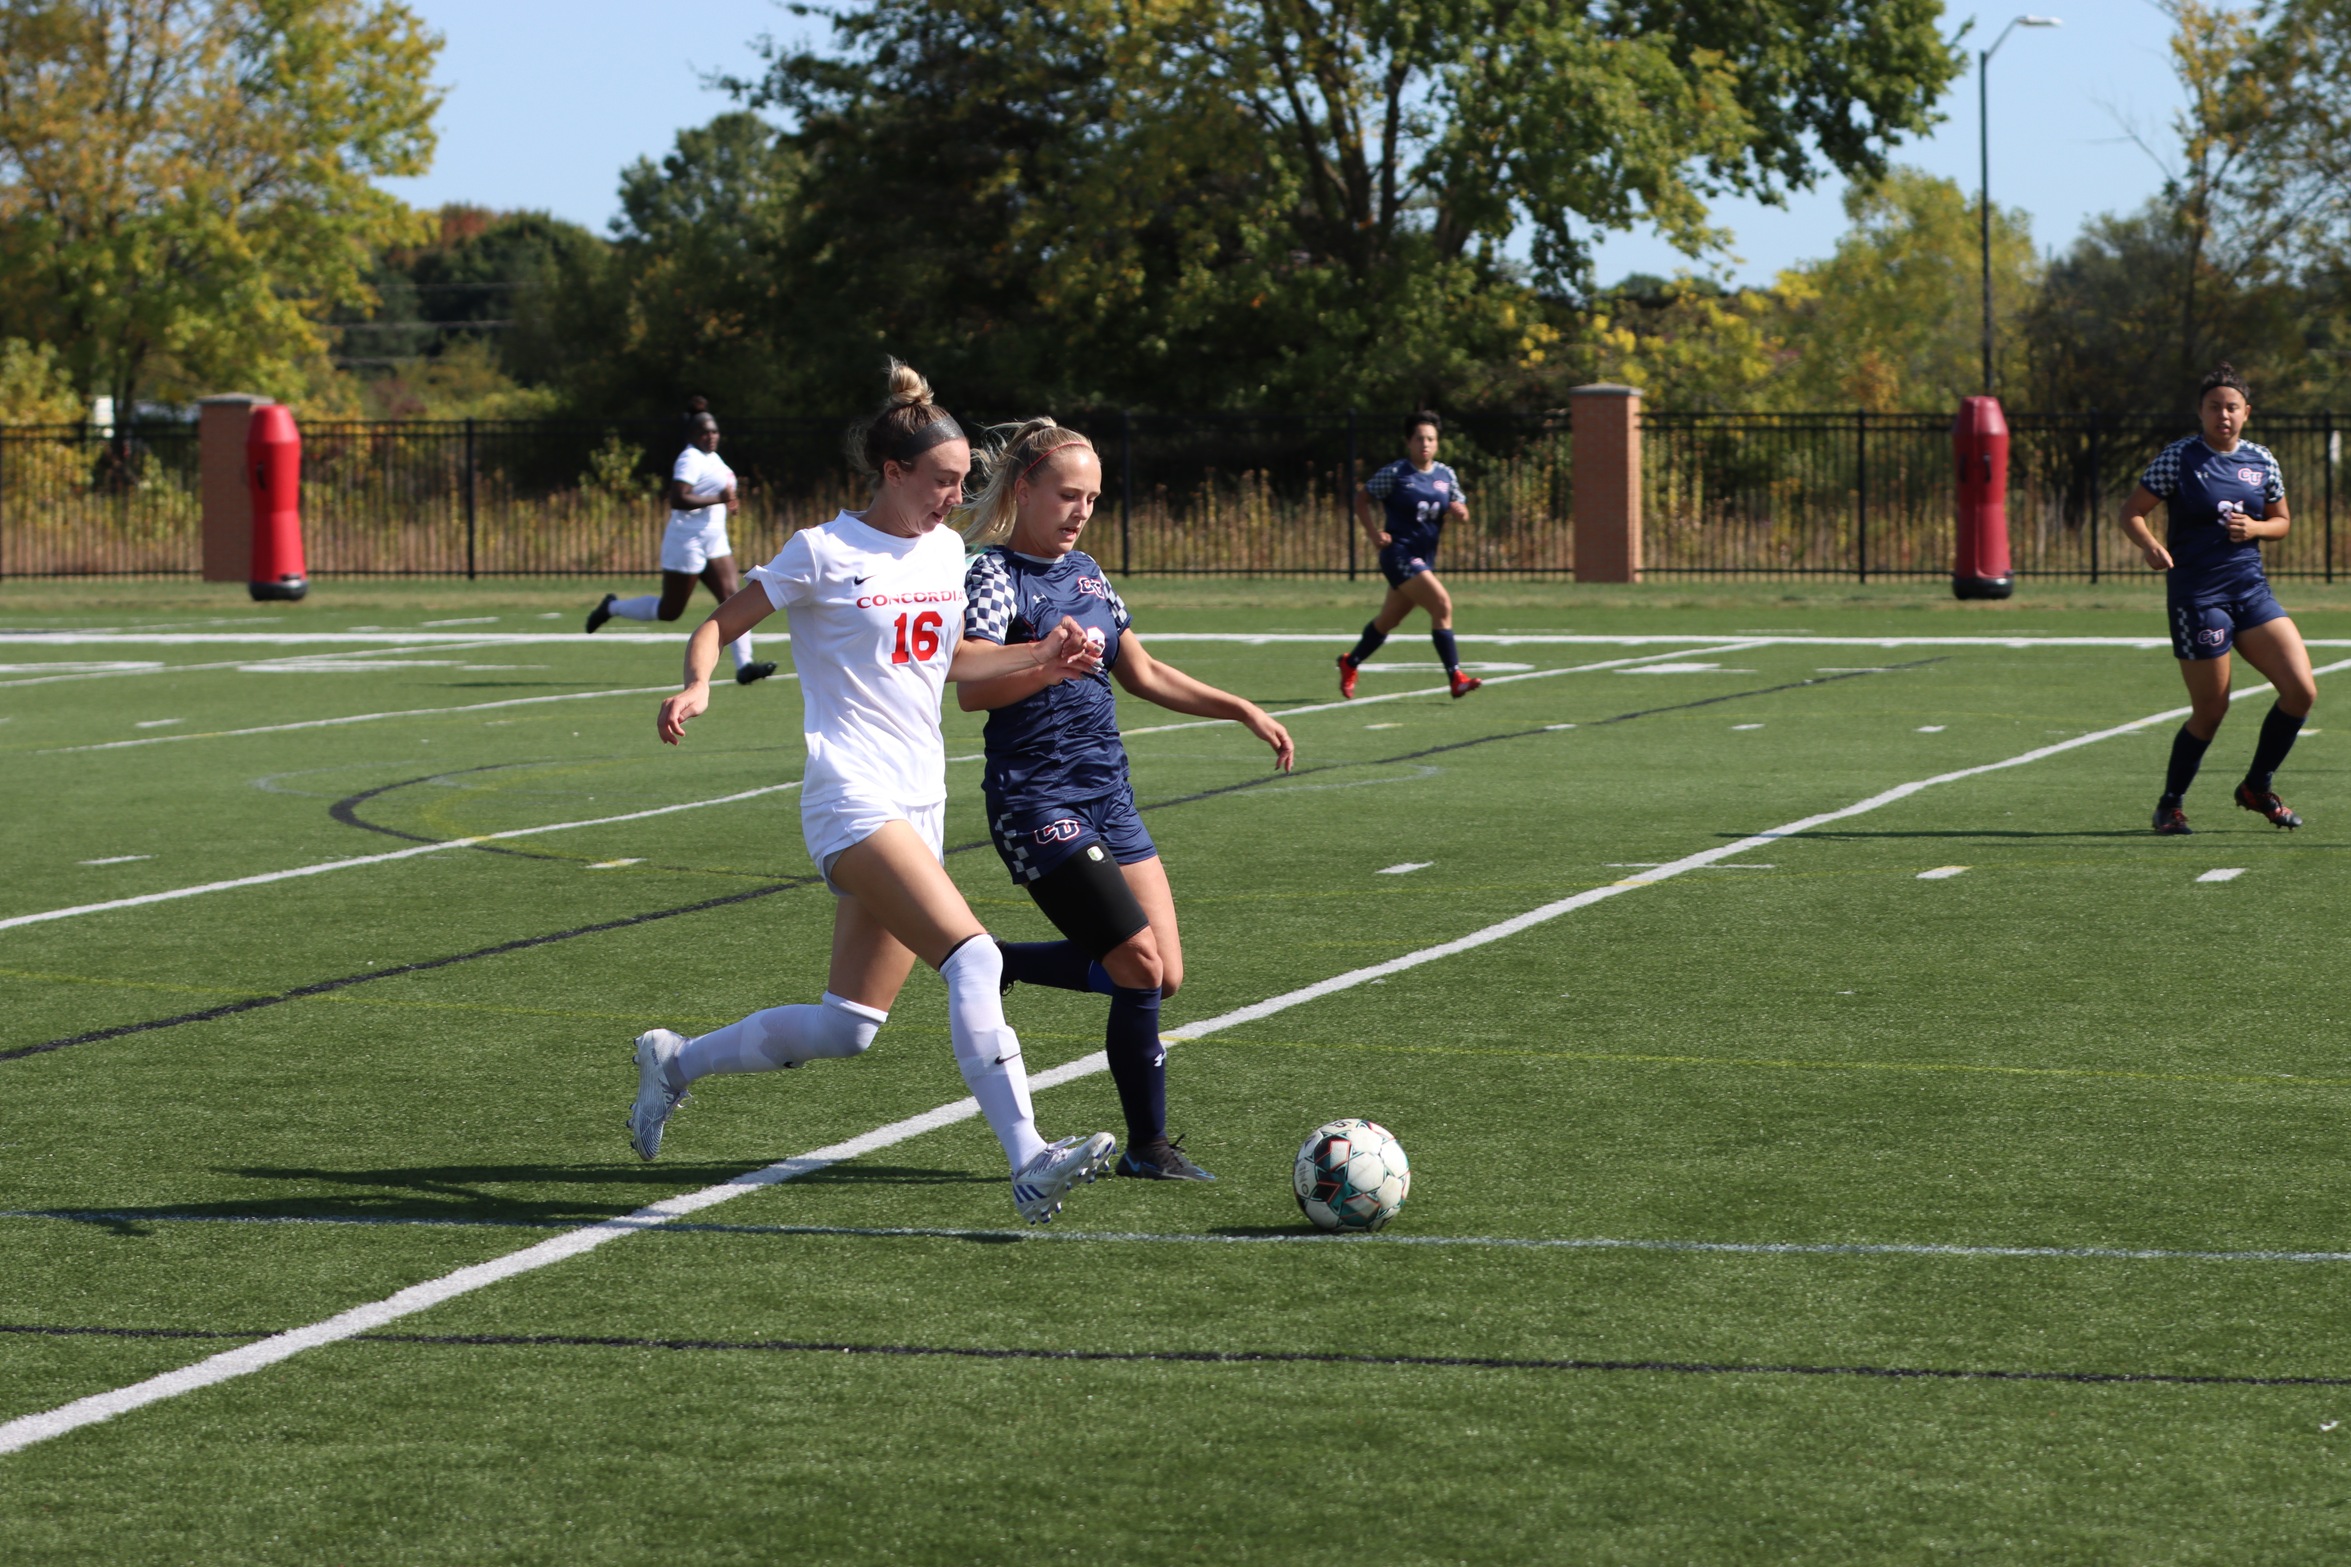 Women's Soccer concludes season with draw at Cornerstone